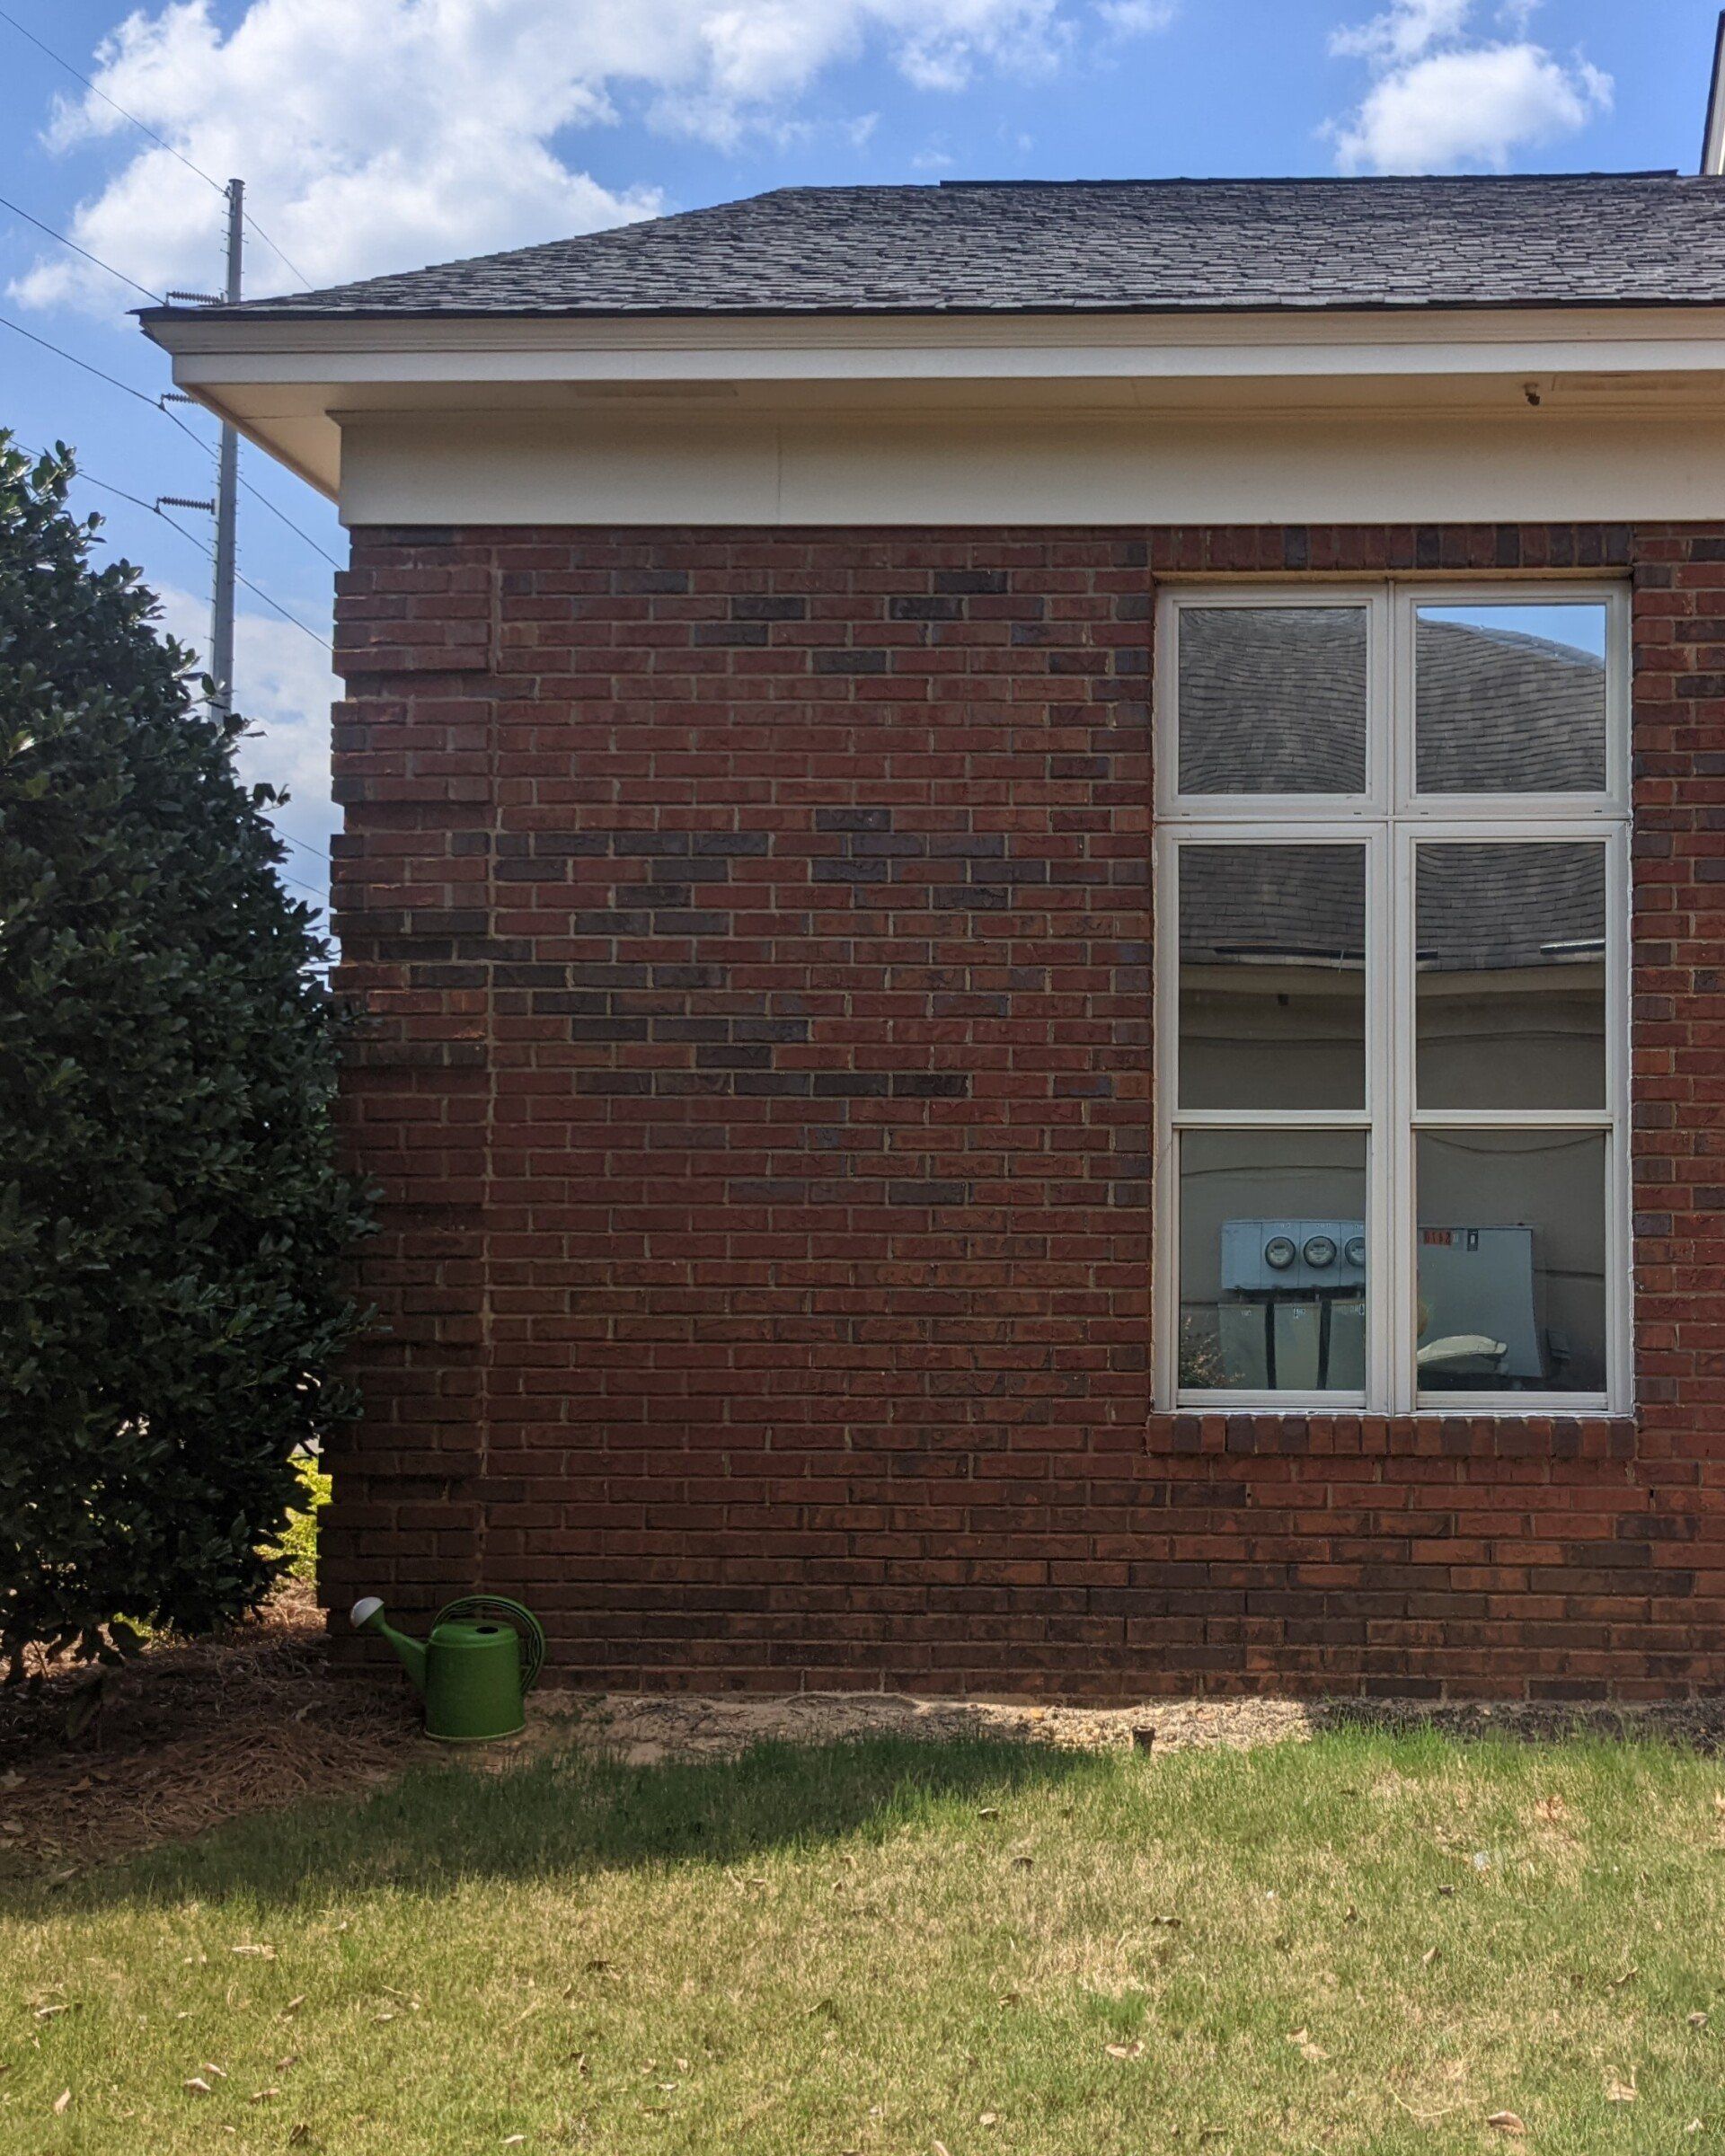 window tinting service - top-rated energy efficiency was gained after SPF Tint at Prattville Pediatrics. Now easily cooling the climate in Prattville AL